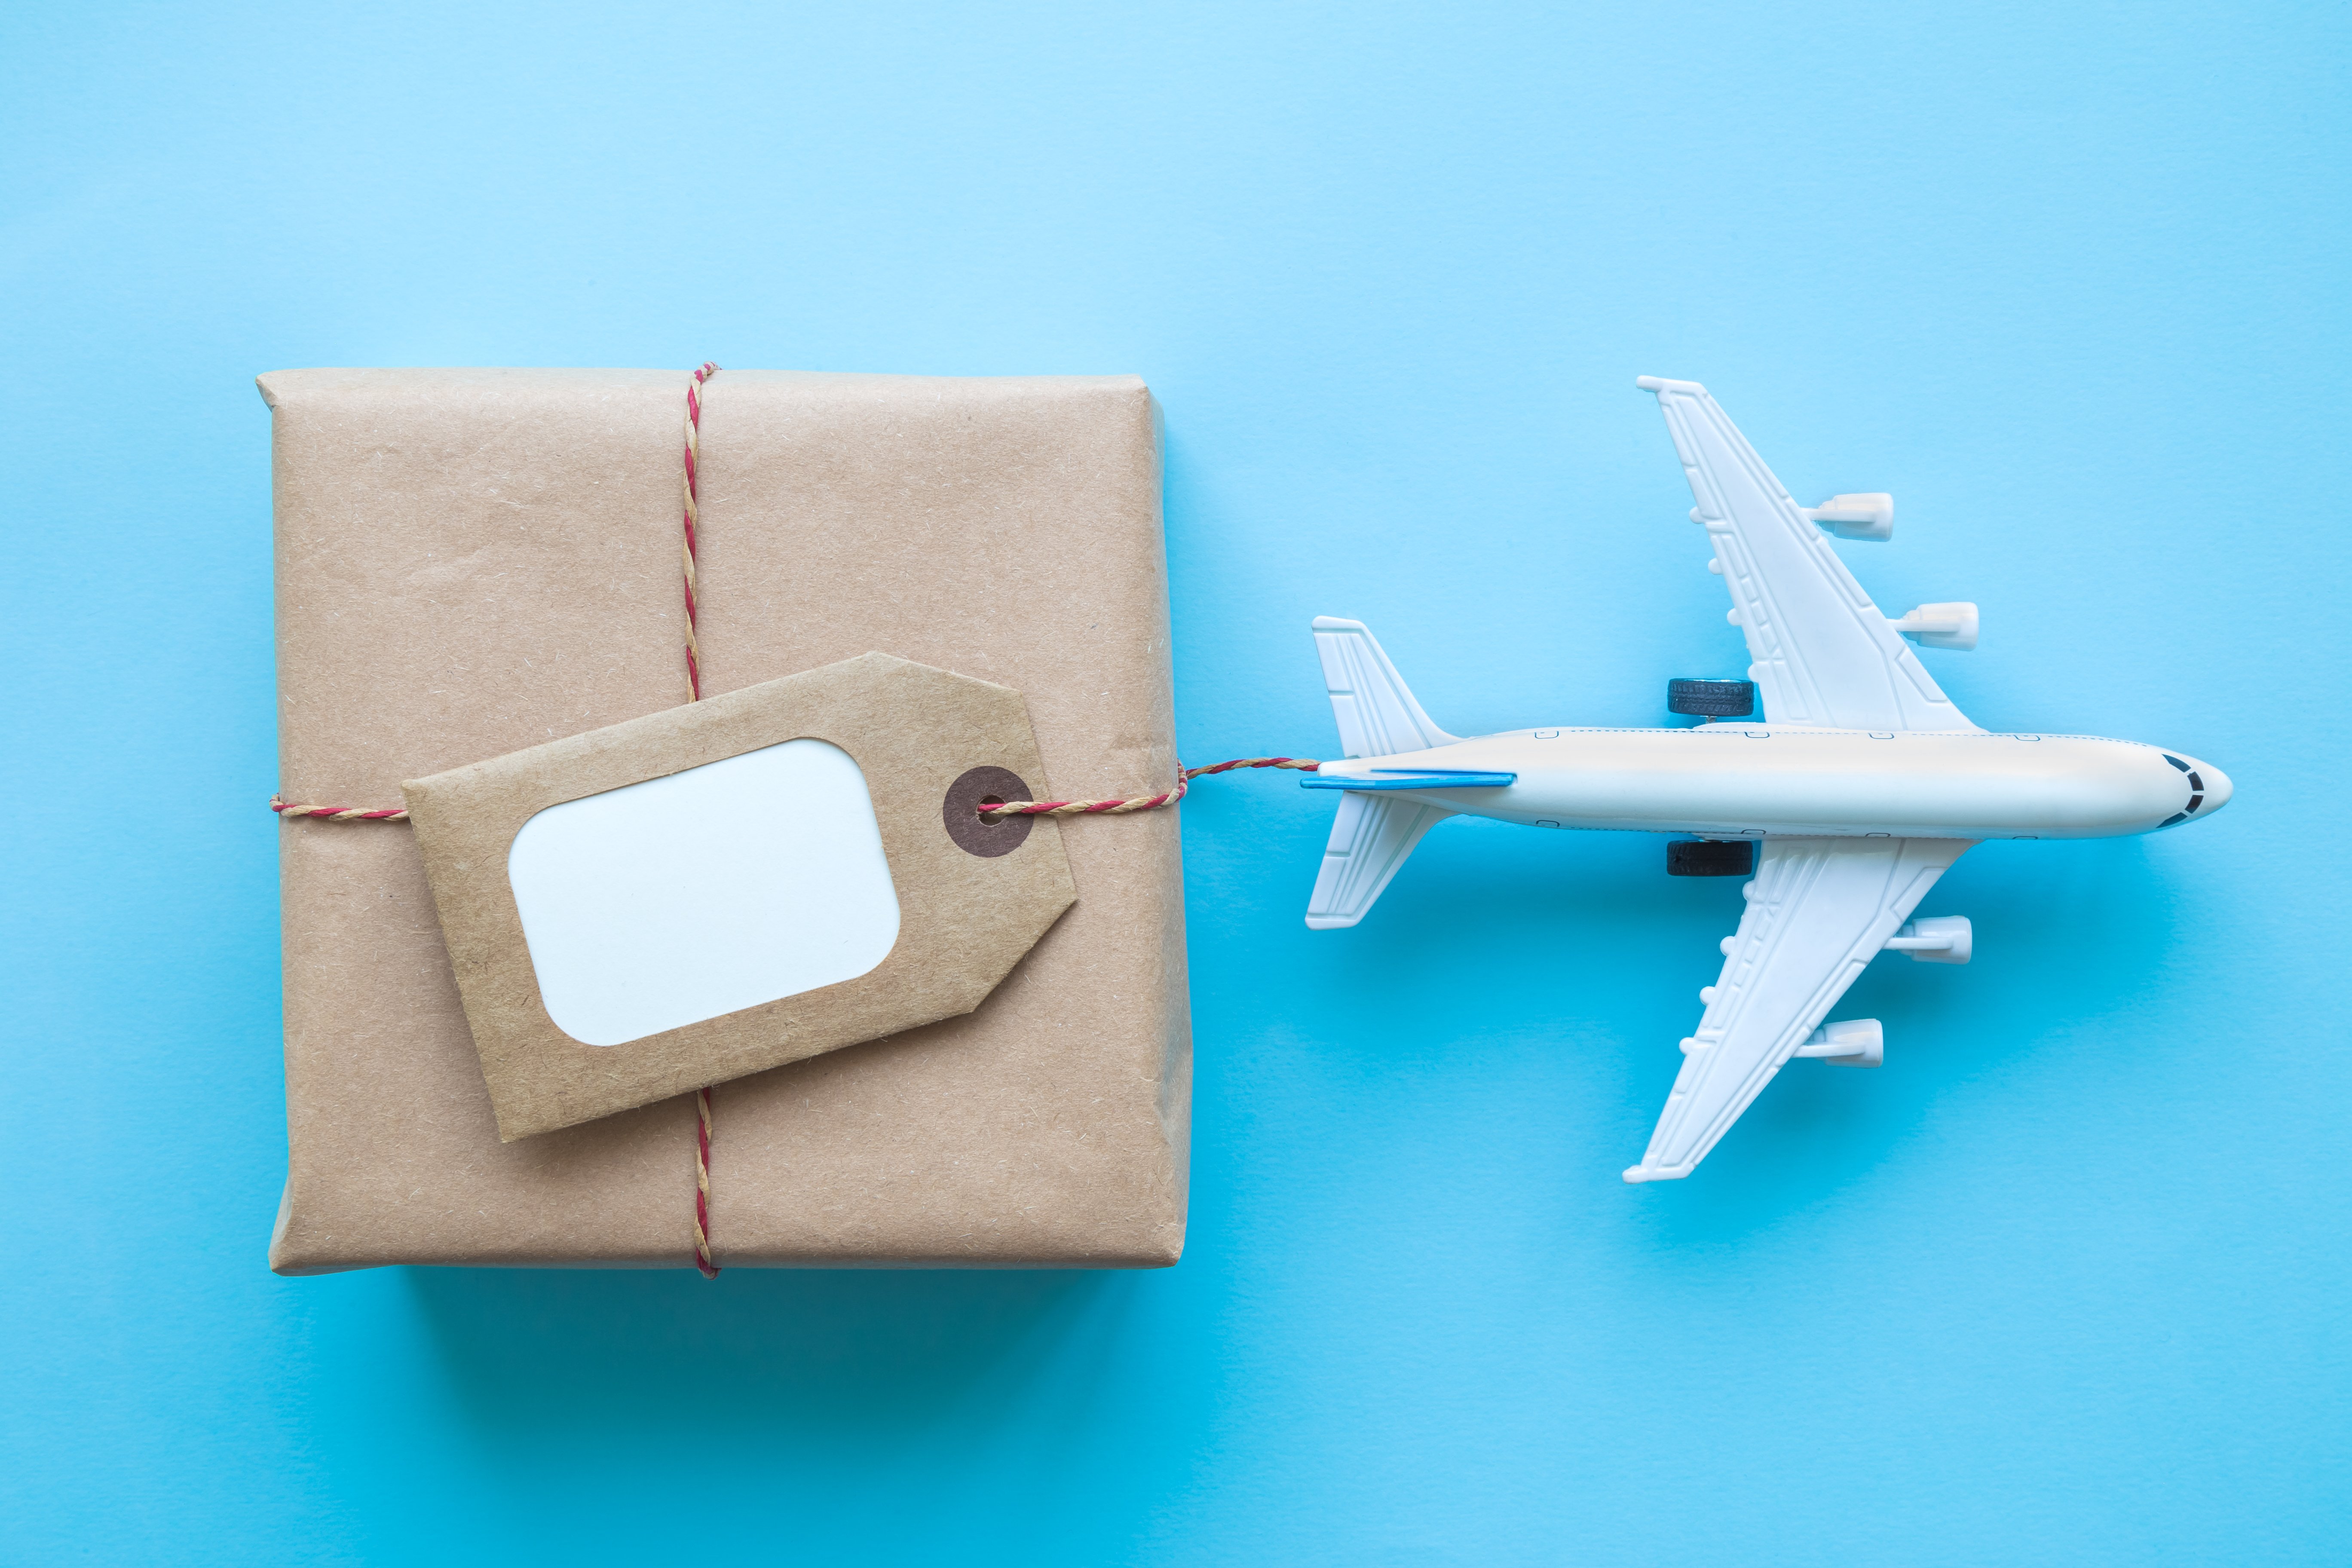 Toy plane attached by a string to a package wrapped in brown paper